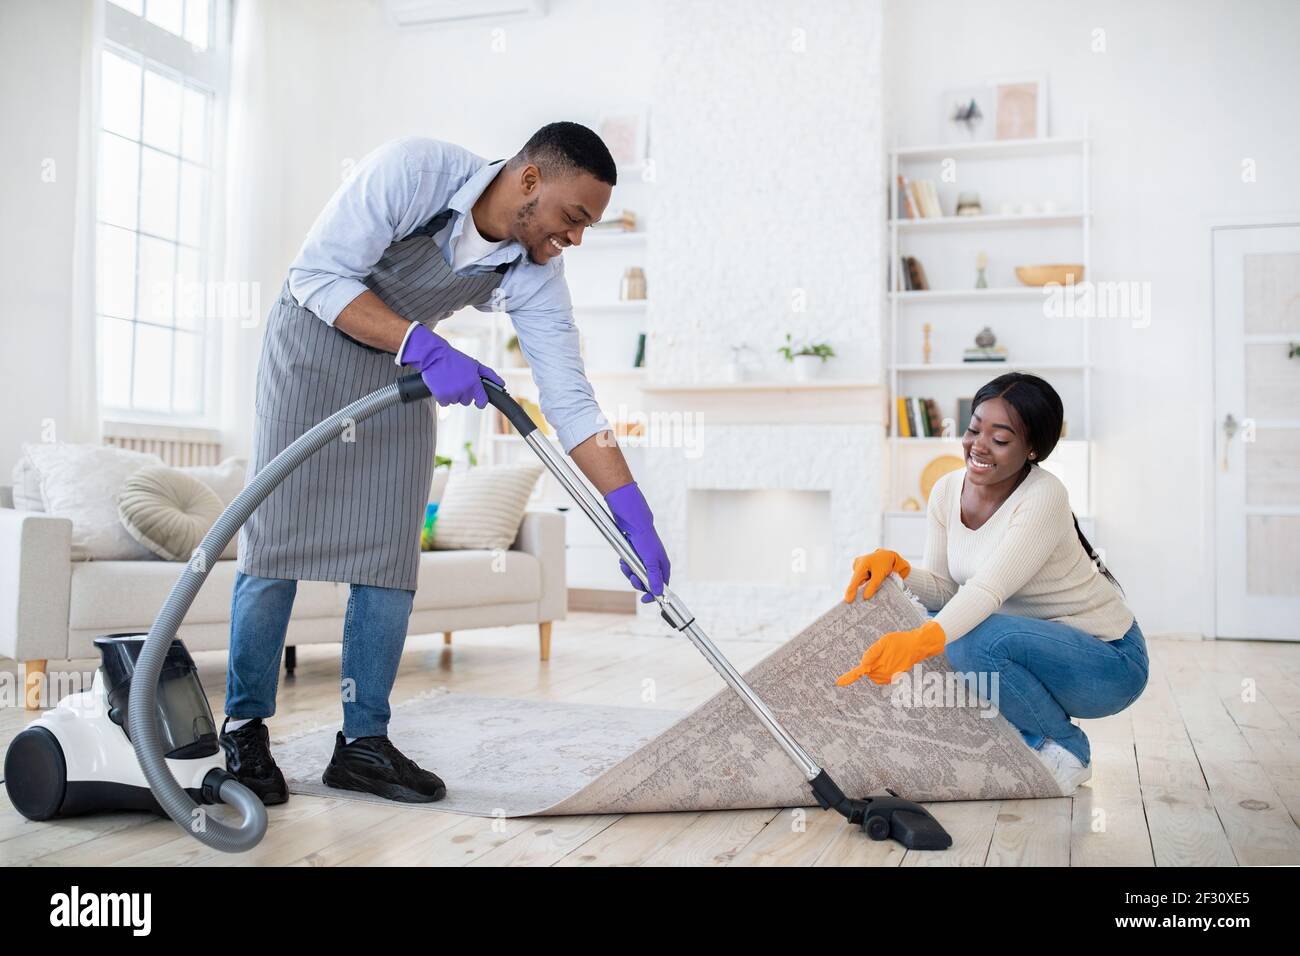 https://c8.alamy.com/comp/2F30XE5/positive-black-couple-cleaning-up-together-vacuuming-under-carpet-at-their-house-copy-space-2F30XE5.jpg